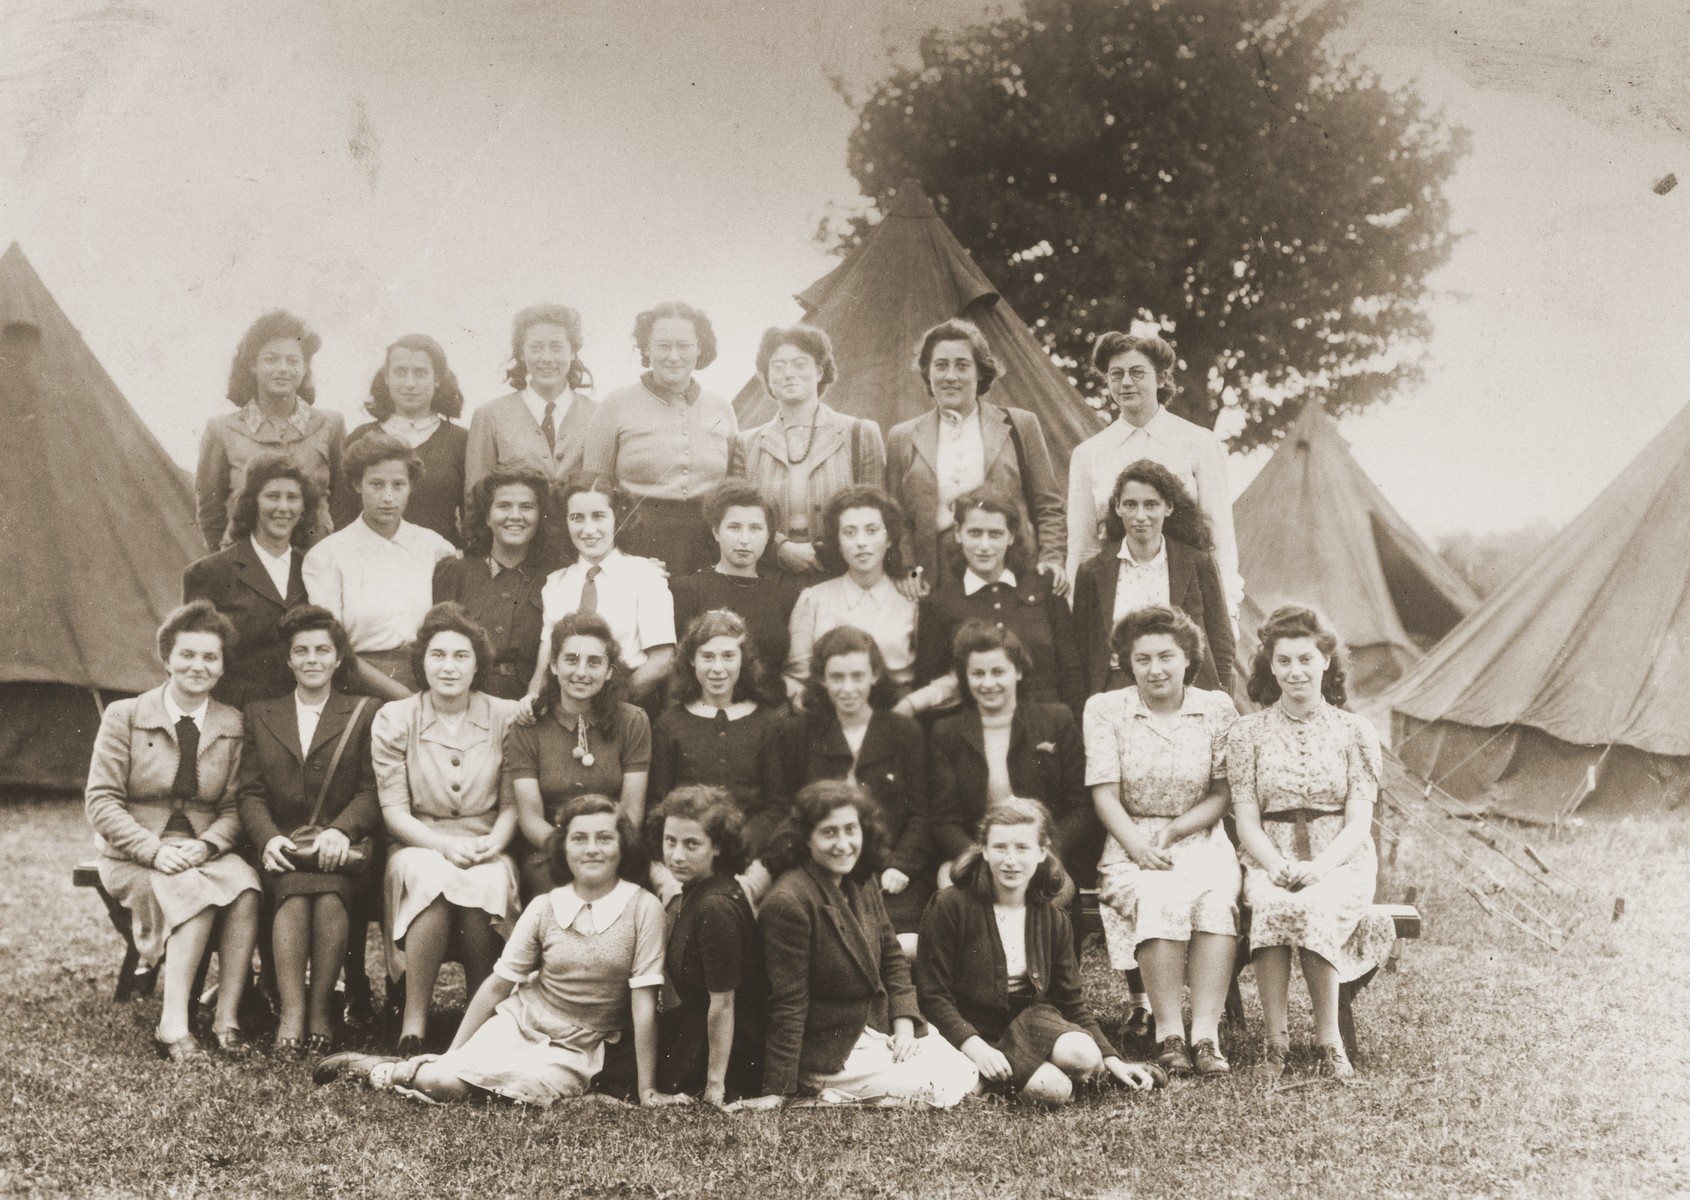 Group portrait of members of the Ezra youth movement in a "harvesting camp" outside of London, where they assisted local farmers.  

Most of the girls are German Jews who came to England on the Kindertransport.  Trudel Farntrog is pictured in the back row on the right.

.